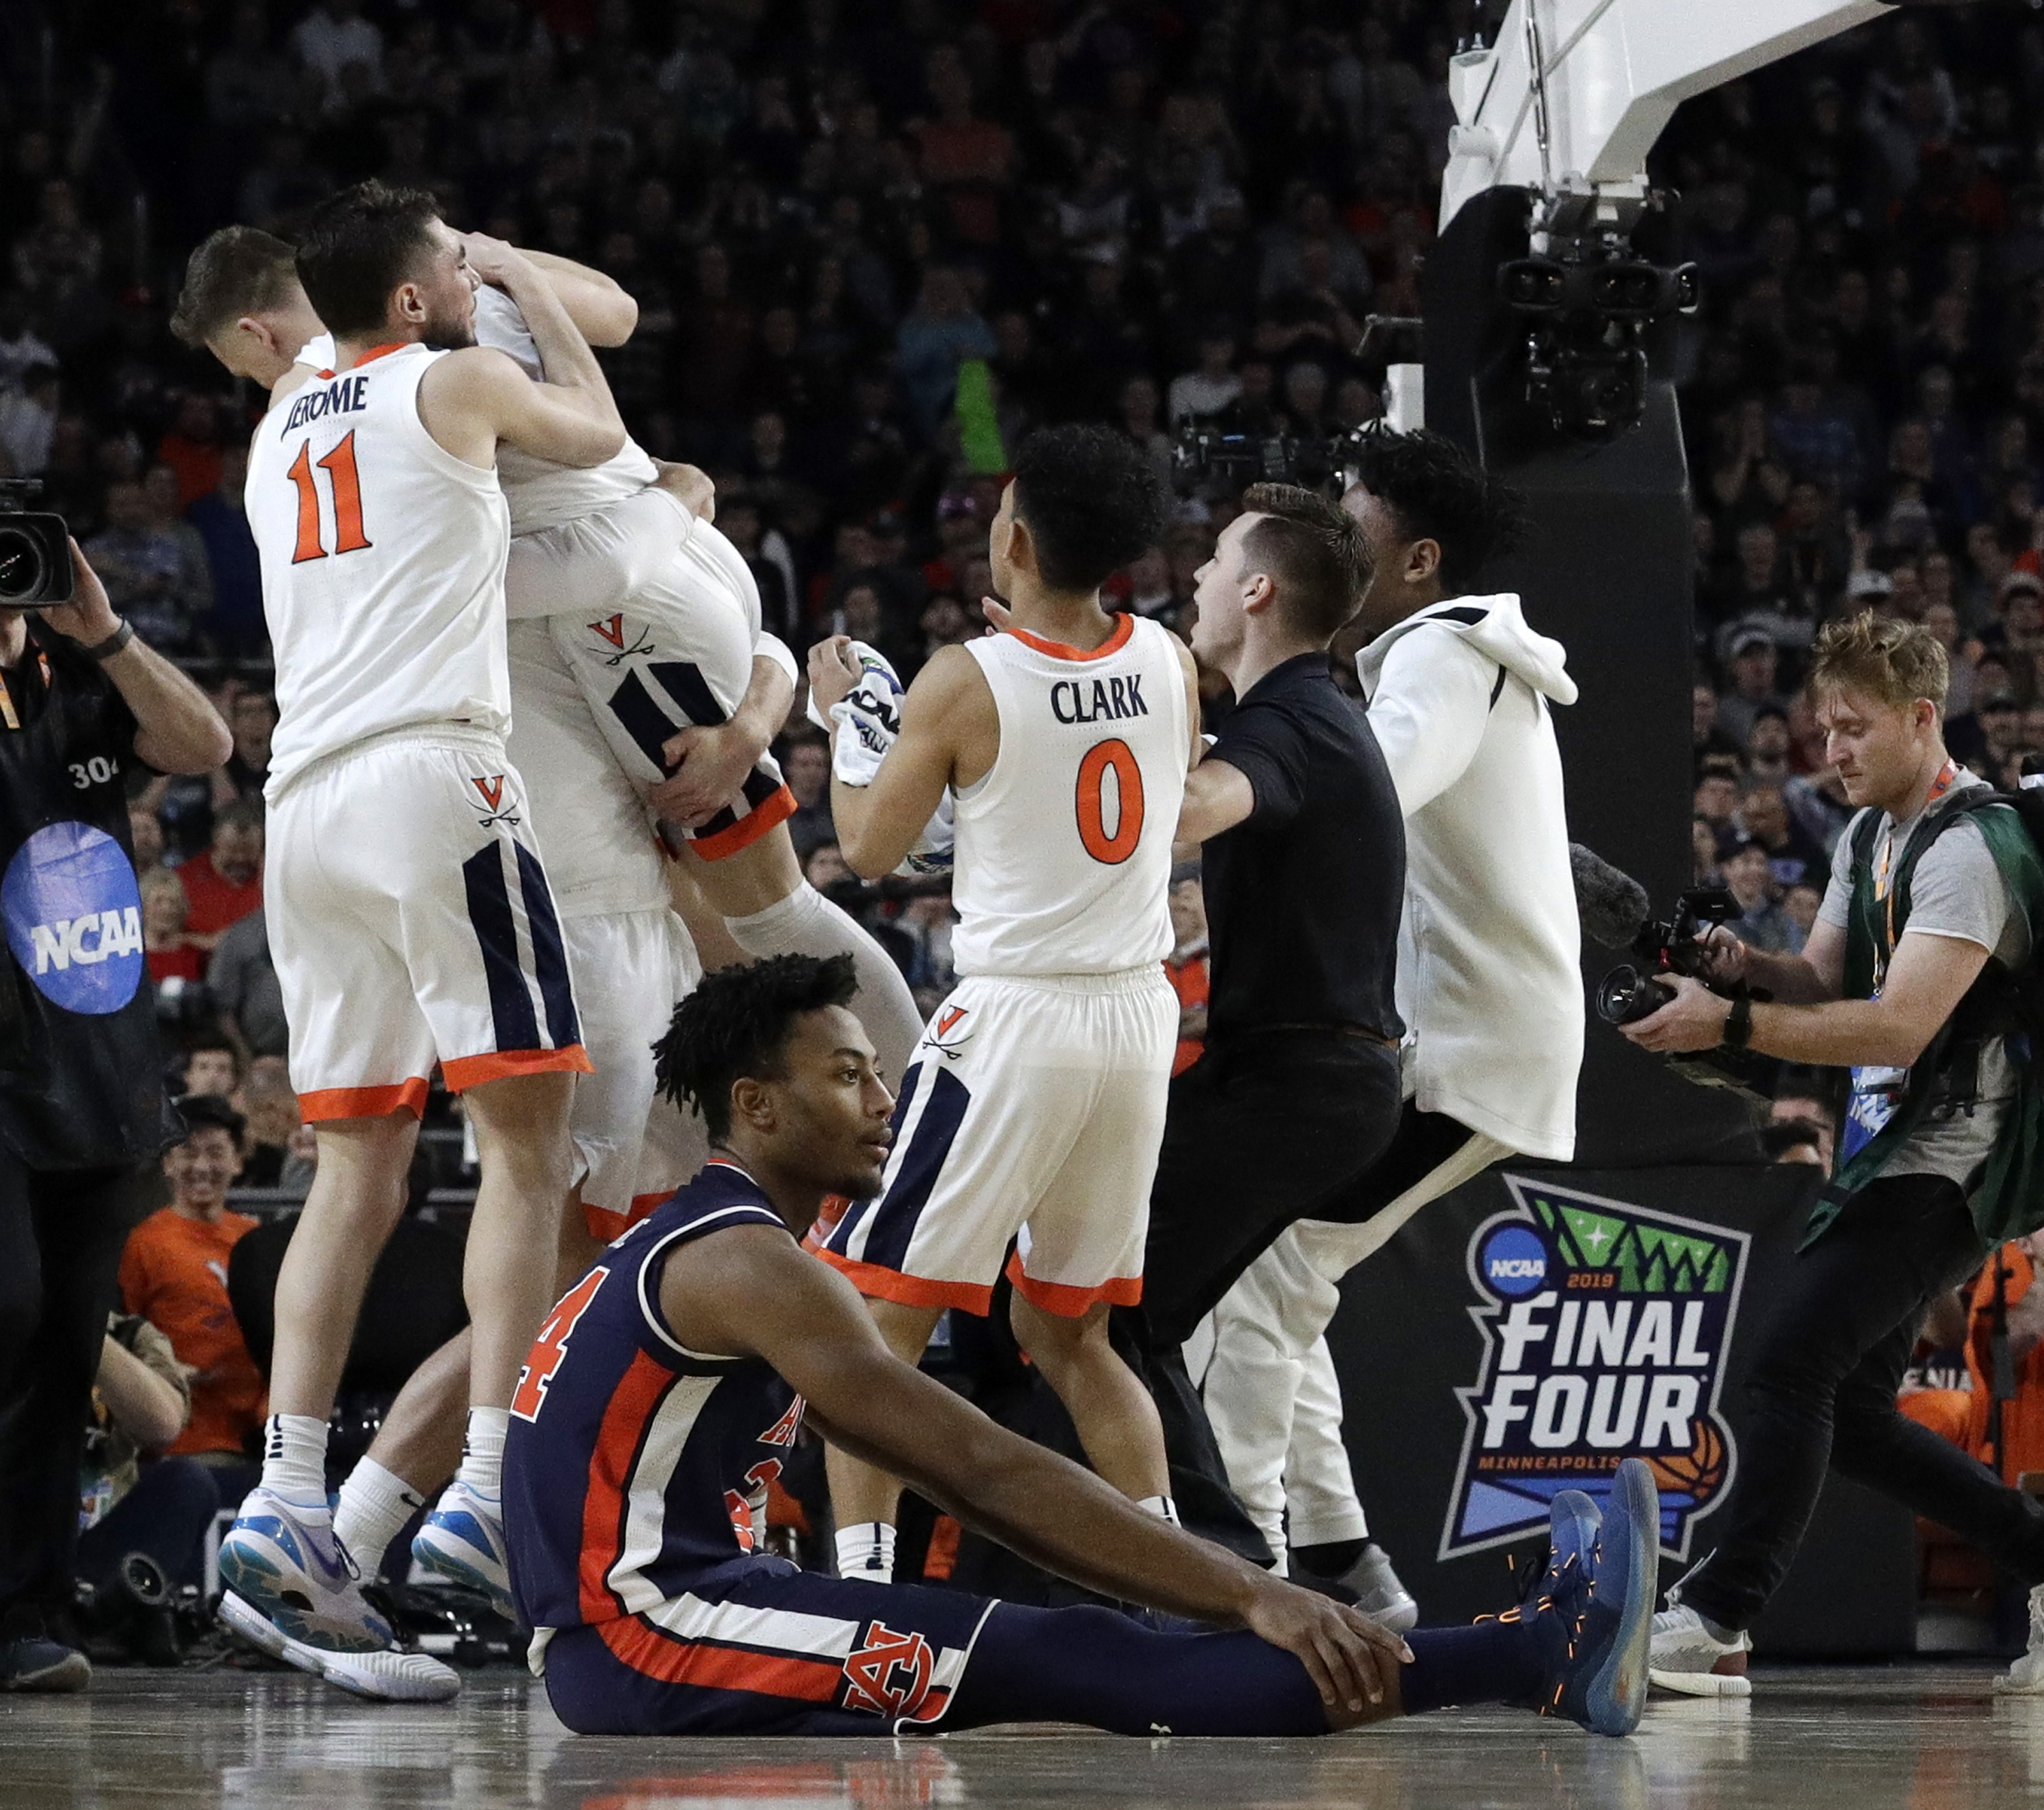 Analysis: Virginia keeps poise in snatching win from Auburn